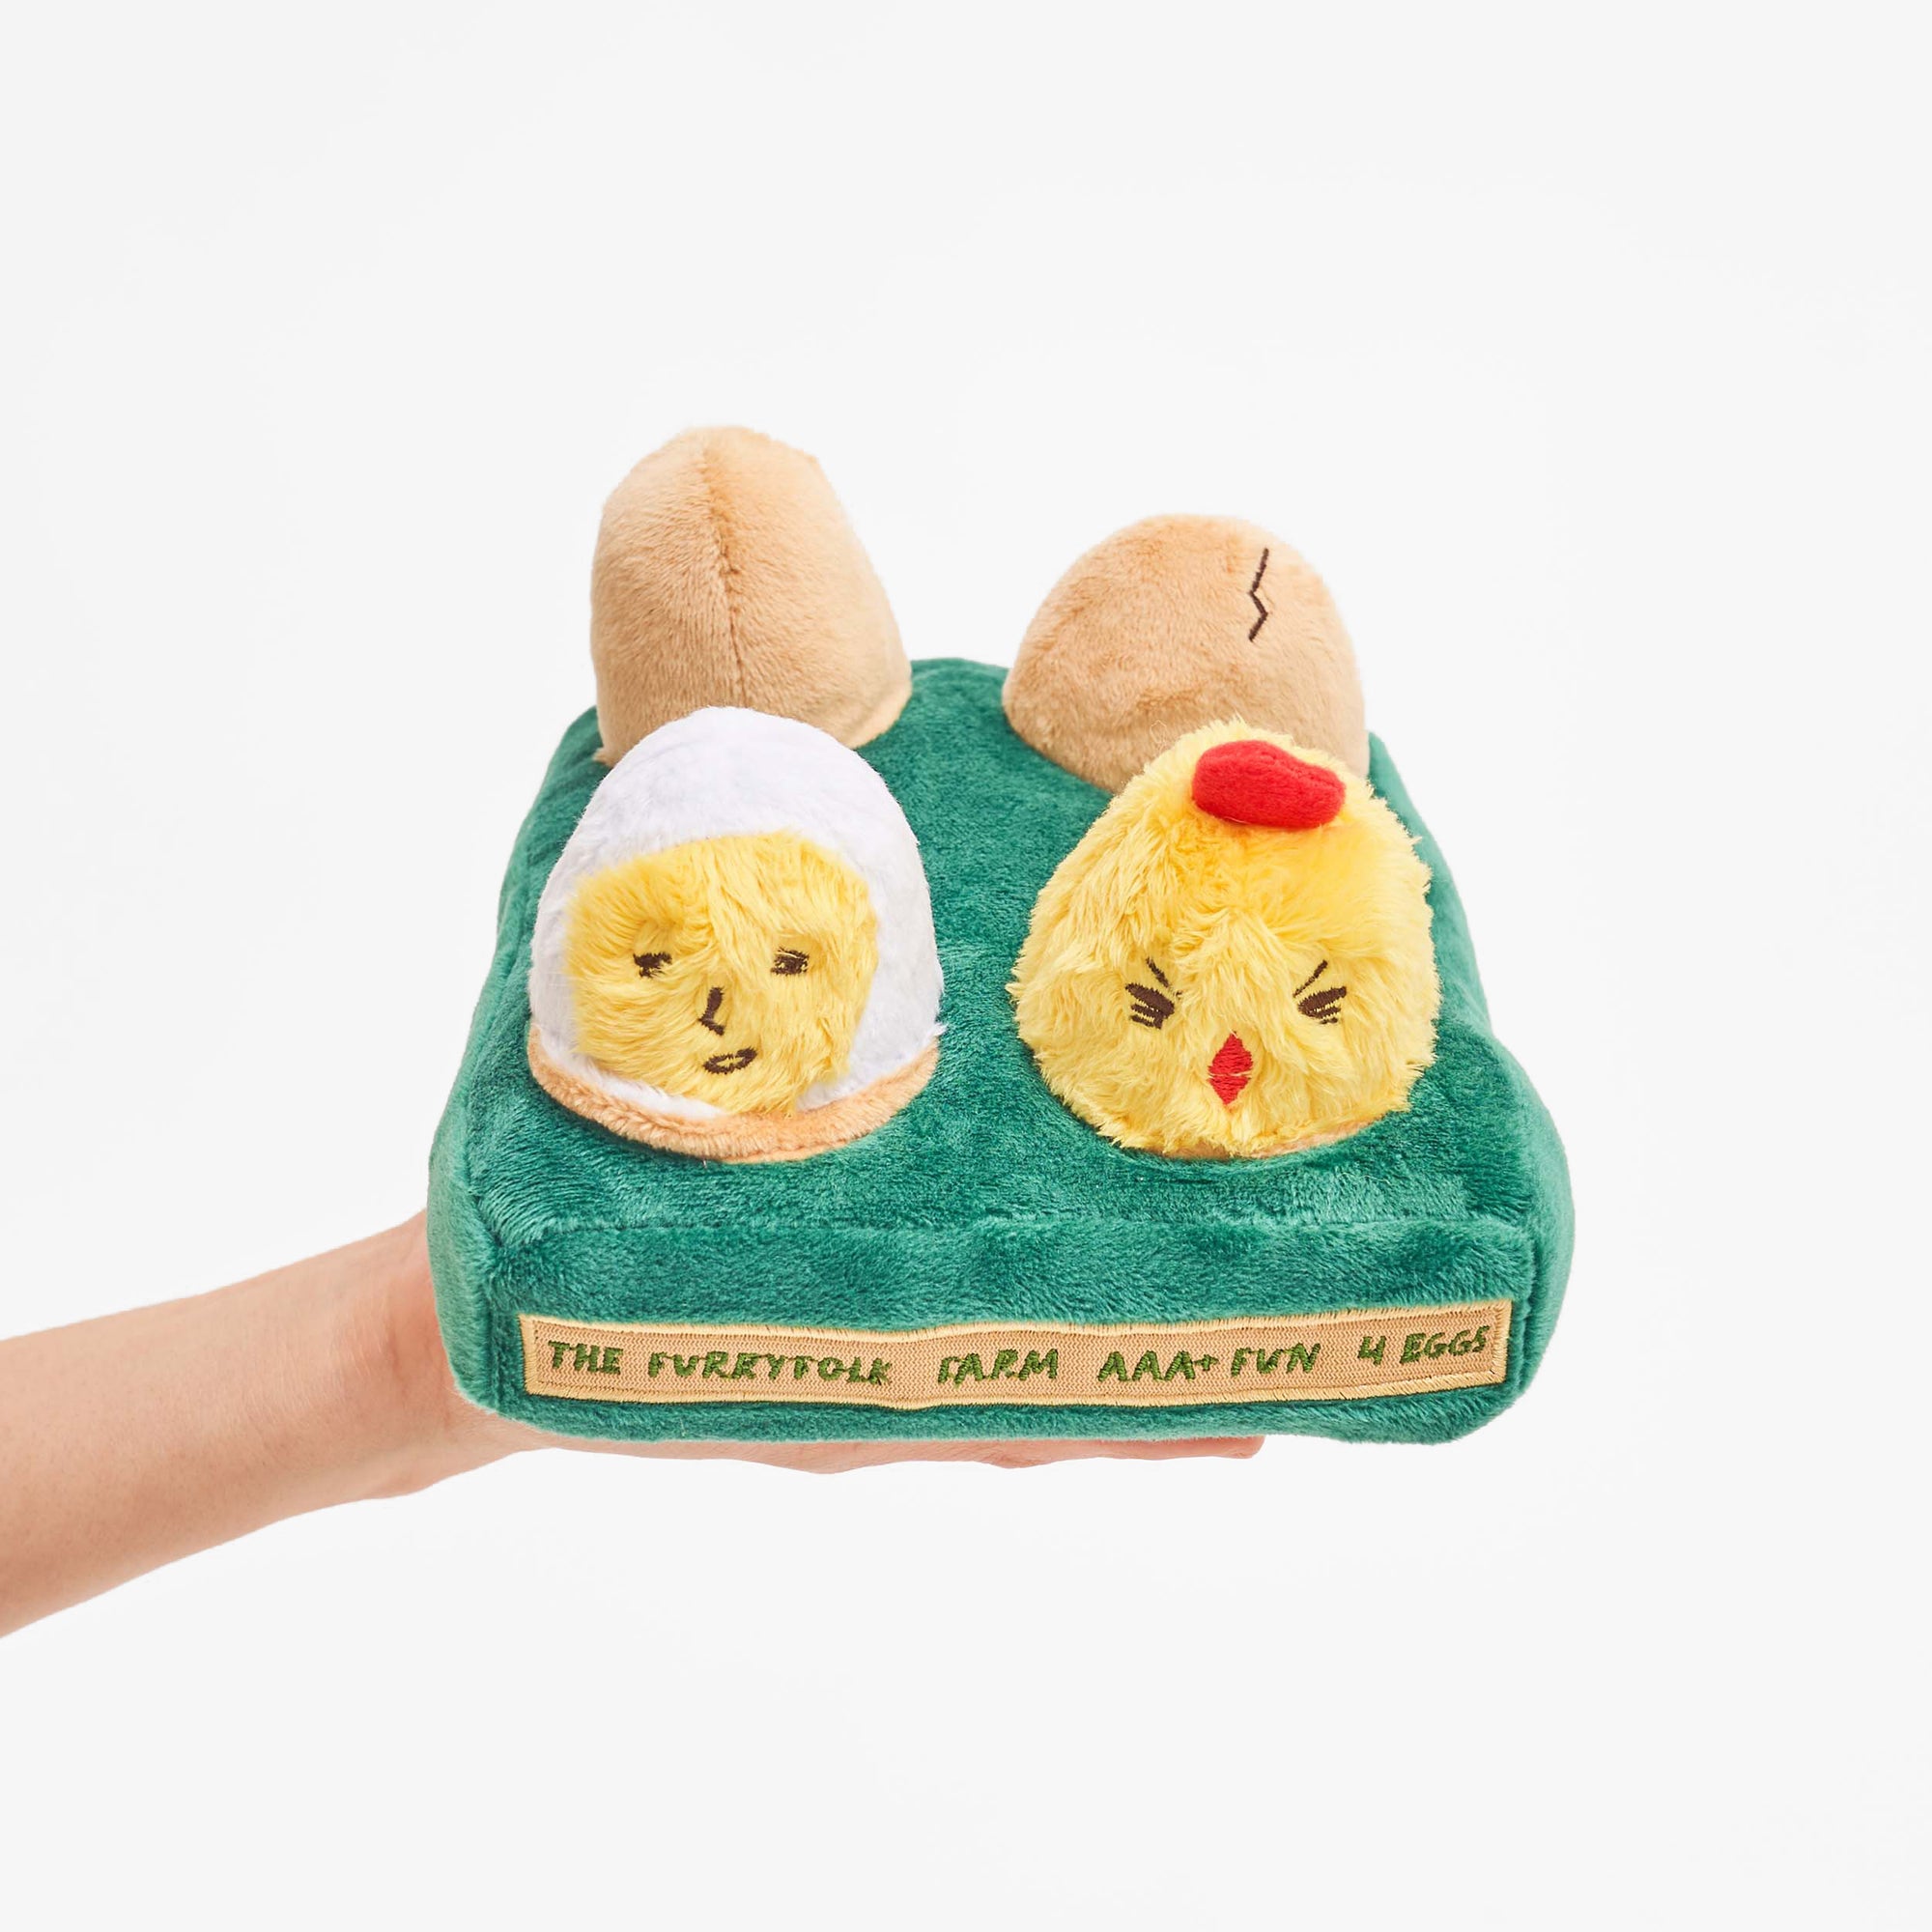 Plush Dog Toy Set with Squeaky Eggs and Chickens for Fun and Training.